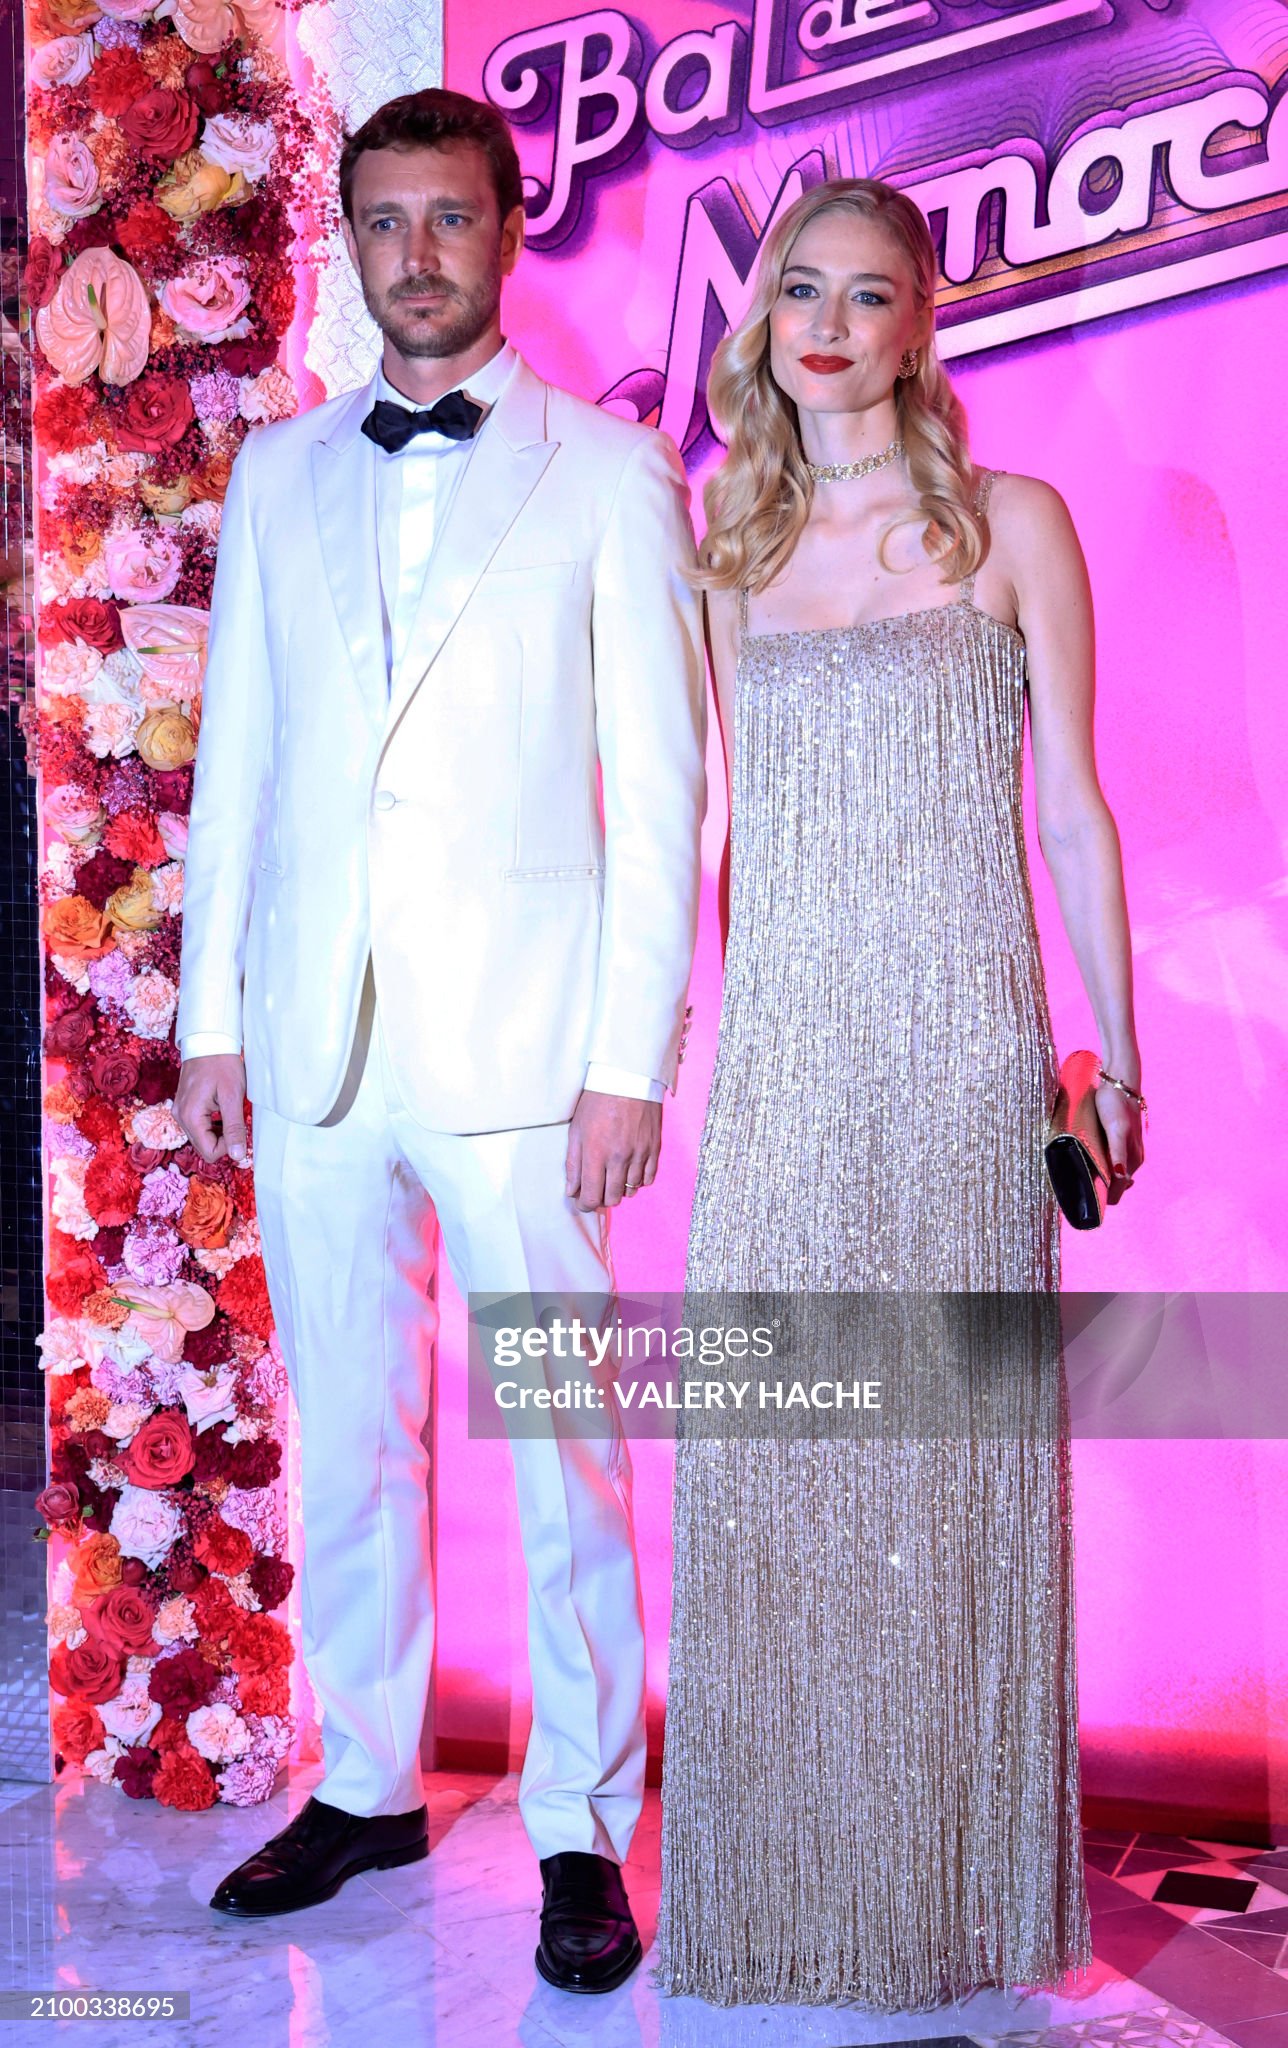 https://media.gettyimages.com/id/2100338695/pt/foto/pierre-casiraghi-and-his-wife-beatrice-borromeo-pose-as-they-attend-the-bal-de-la-rose-event.jpg?s=2048x2048&w=gi&k=20&c=Ef69DmuUPJypQANwZ_B3SNgP36yoBHb3Ky5aKyx0330=